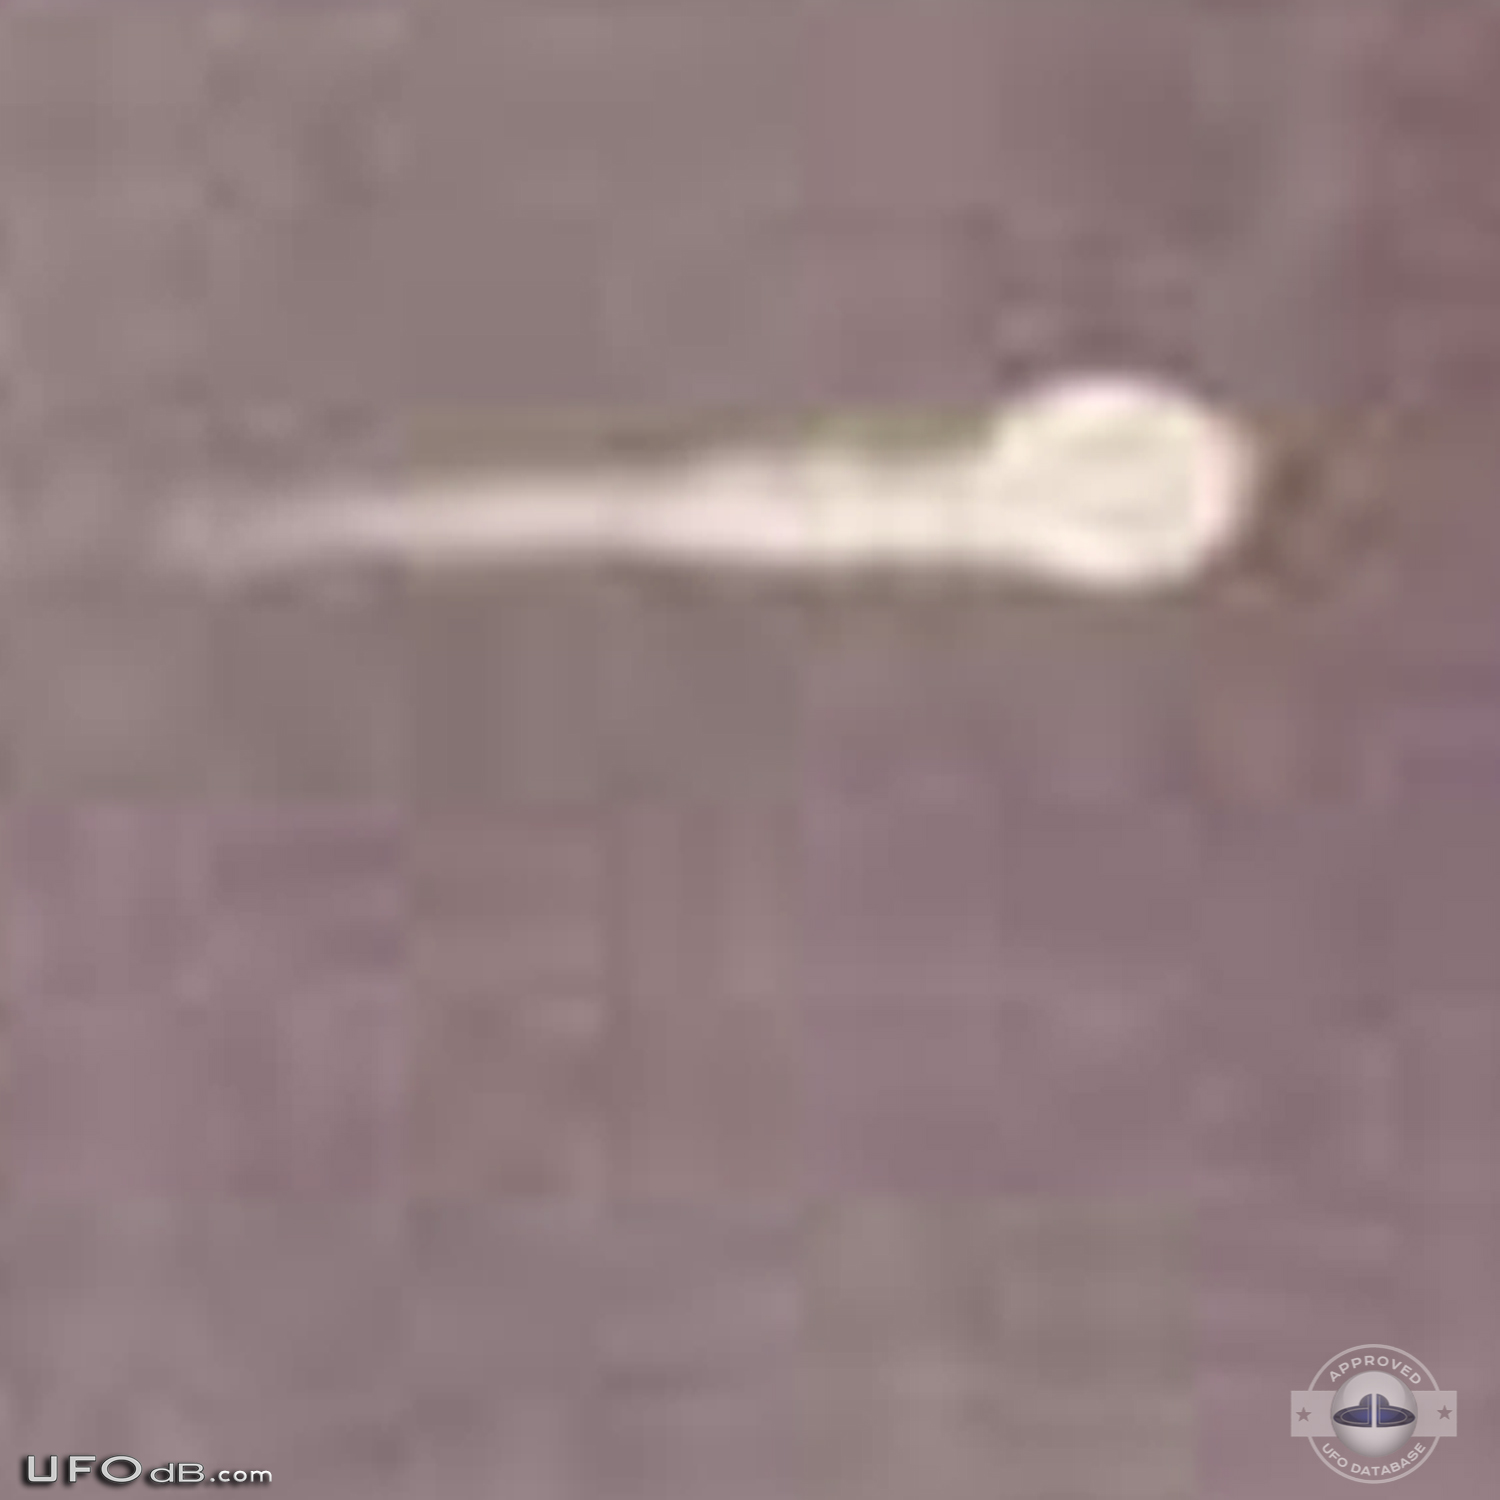 Old 1953 UFO sighting picture caught over Paris, France UFO Picture #543-6